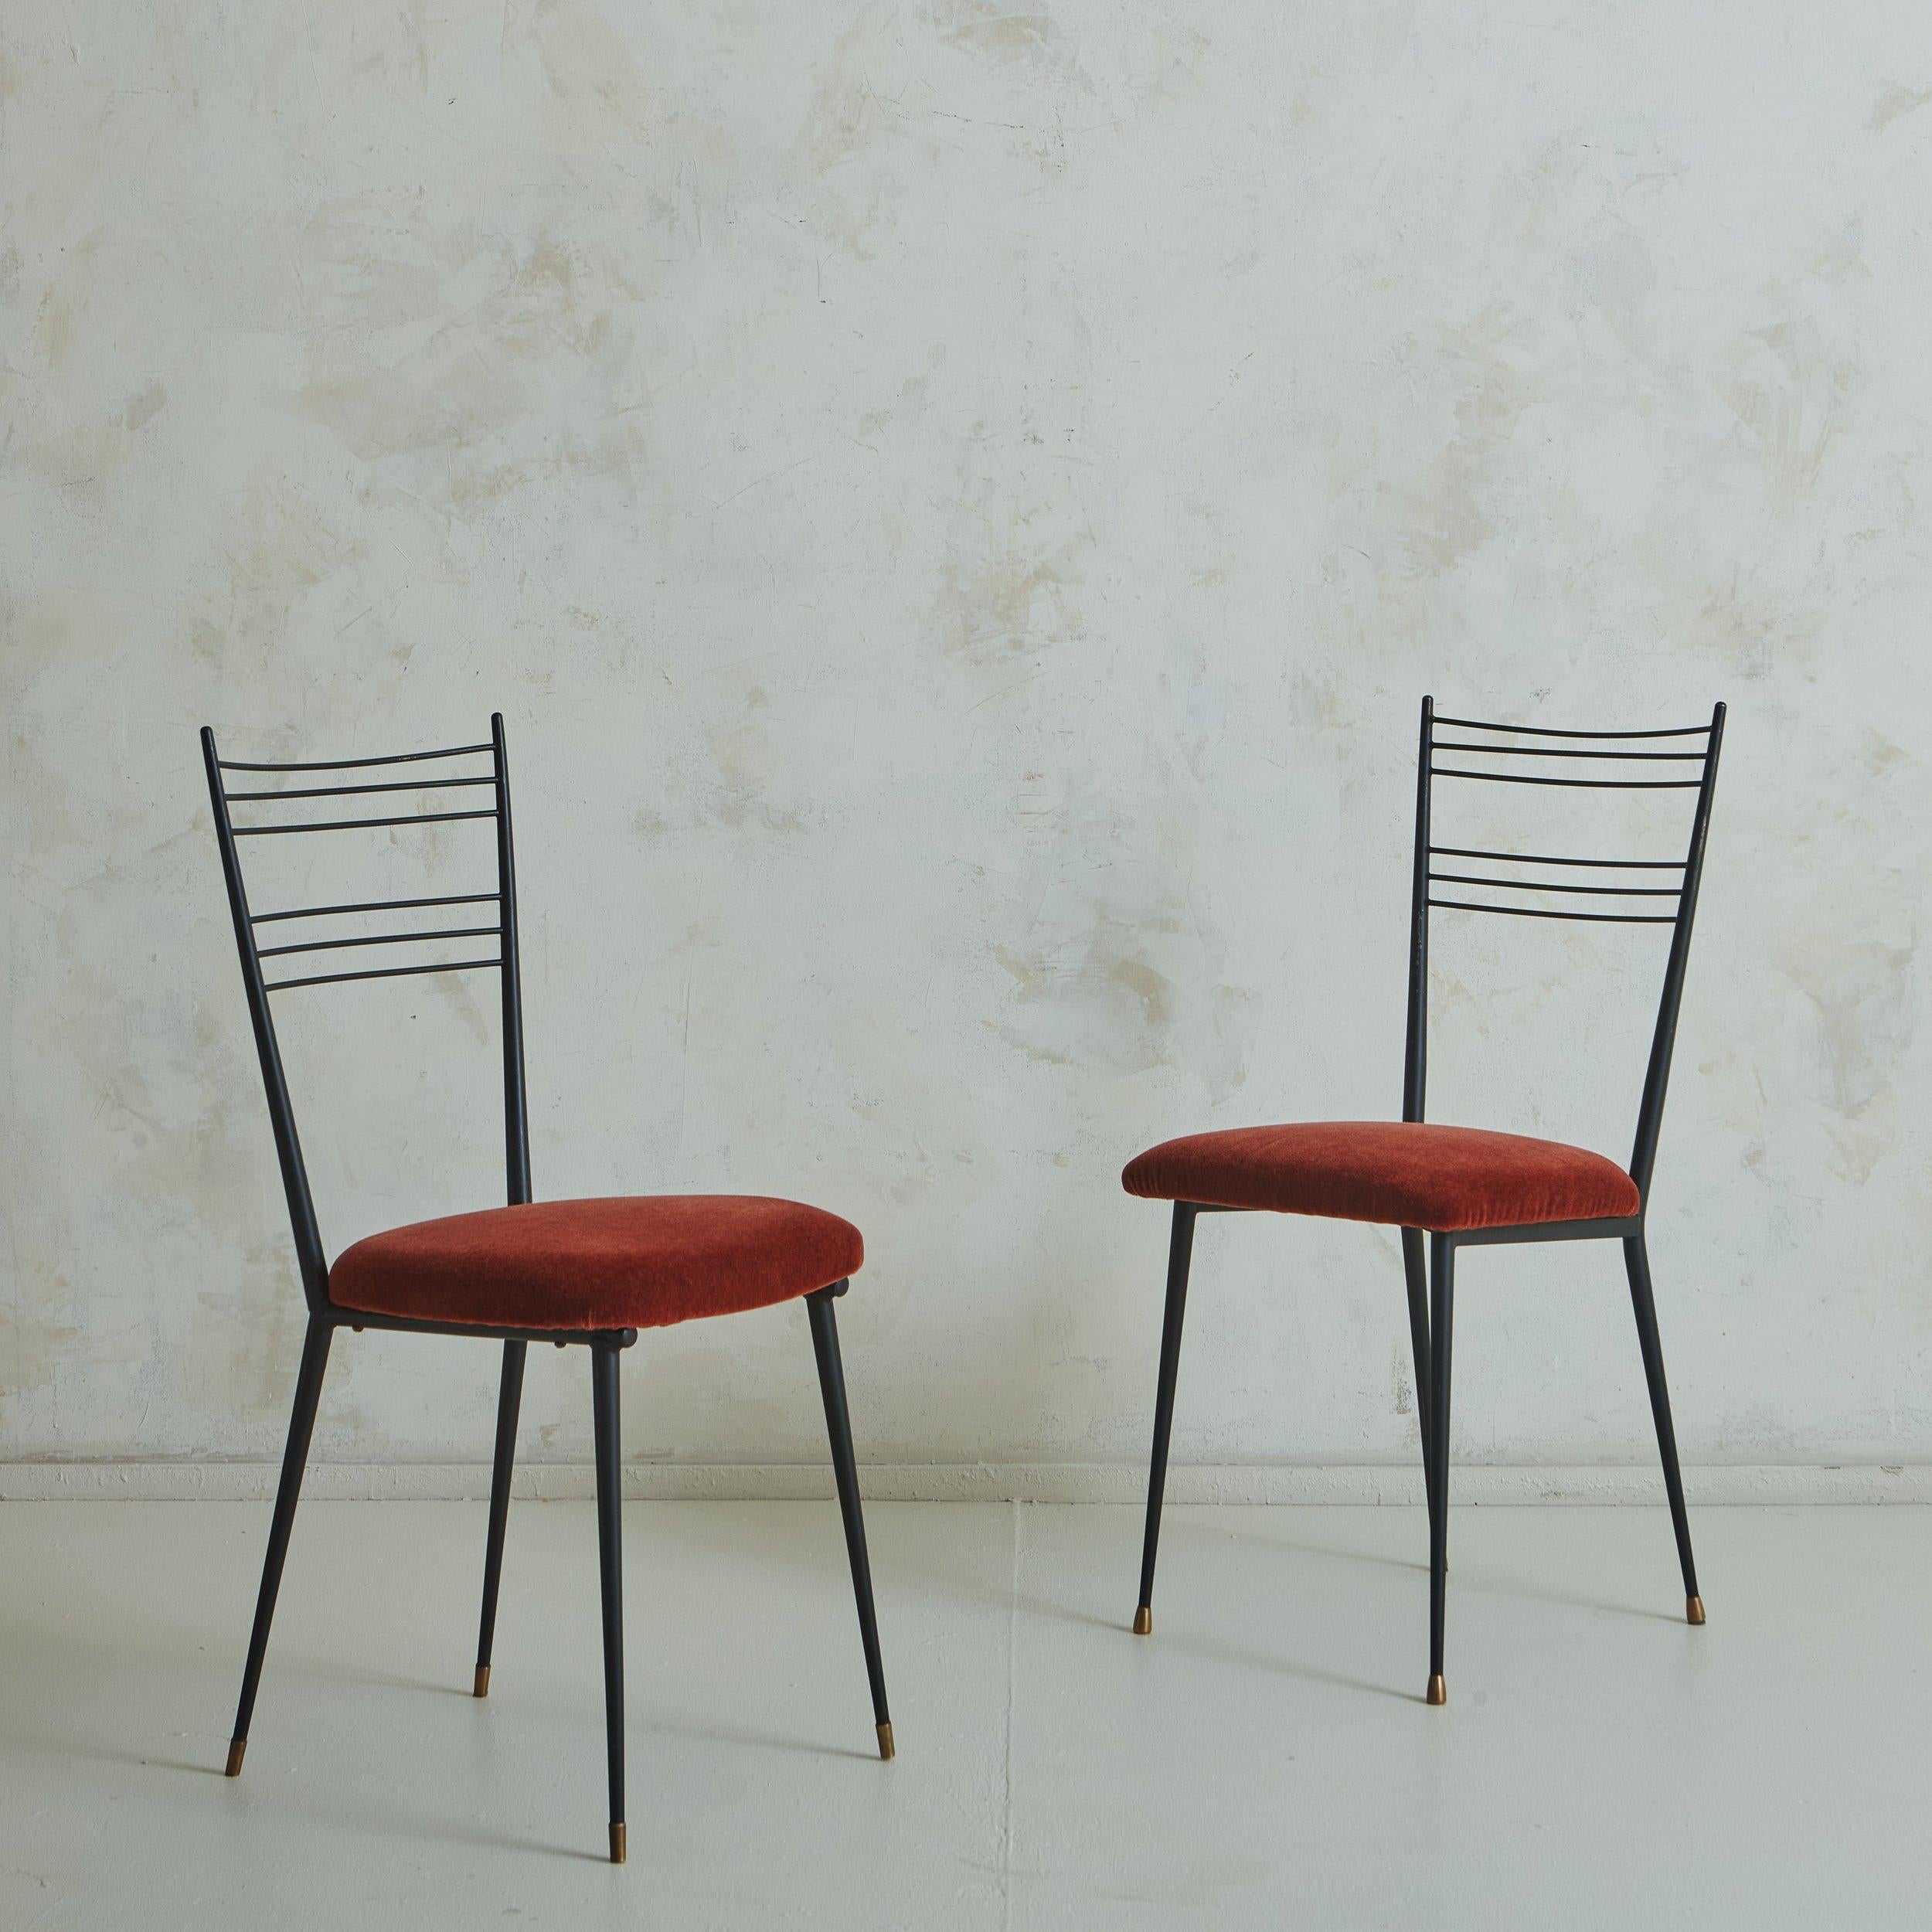 Set of 4 Steel Dining Chairs in Rust Mohair Attributed to Colette Guedon In Good Condition For Sale In Chicago, IL